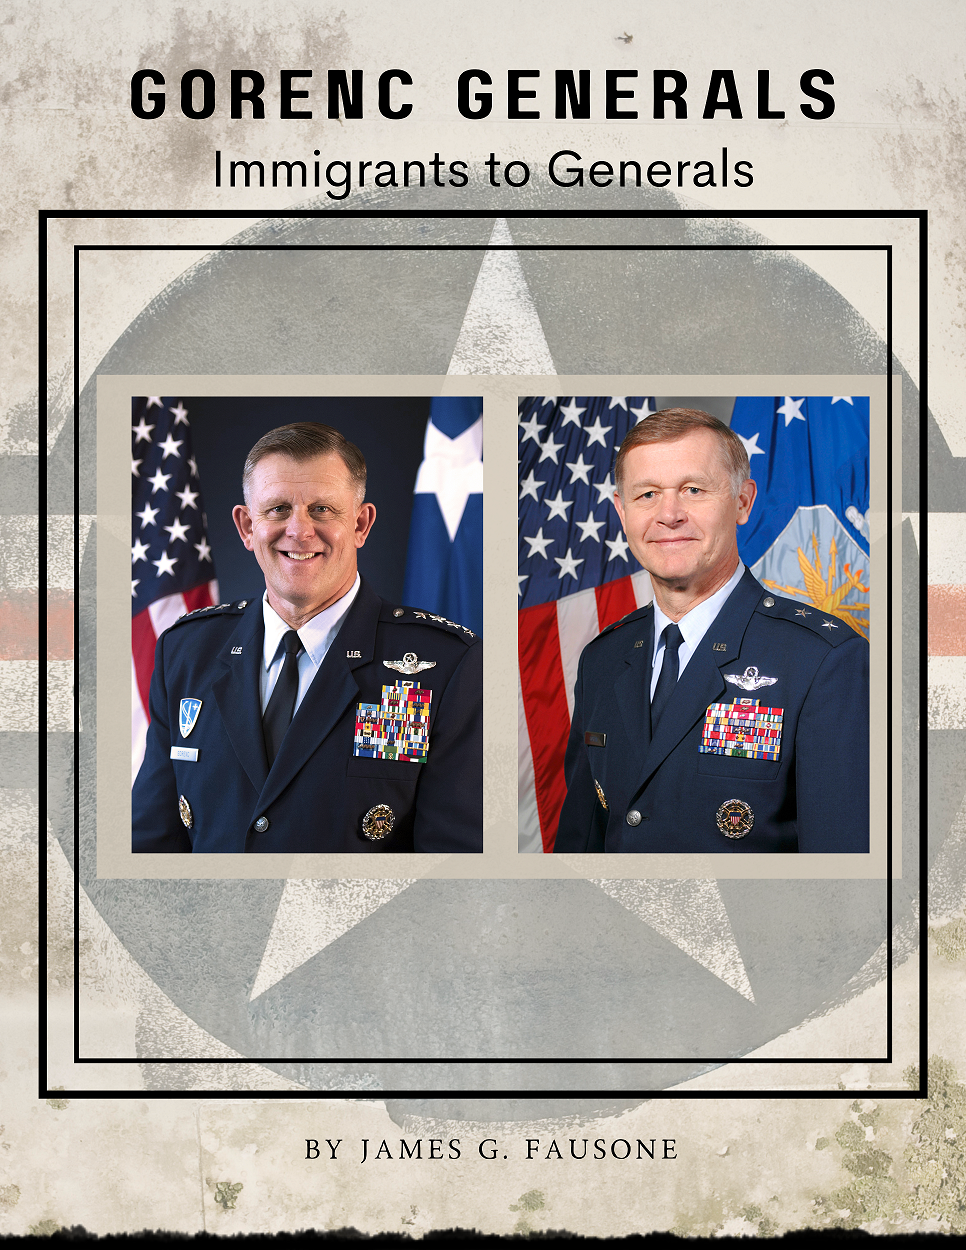 The Gorenc Generals Cover